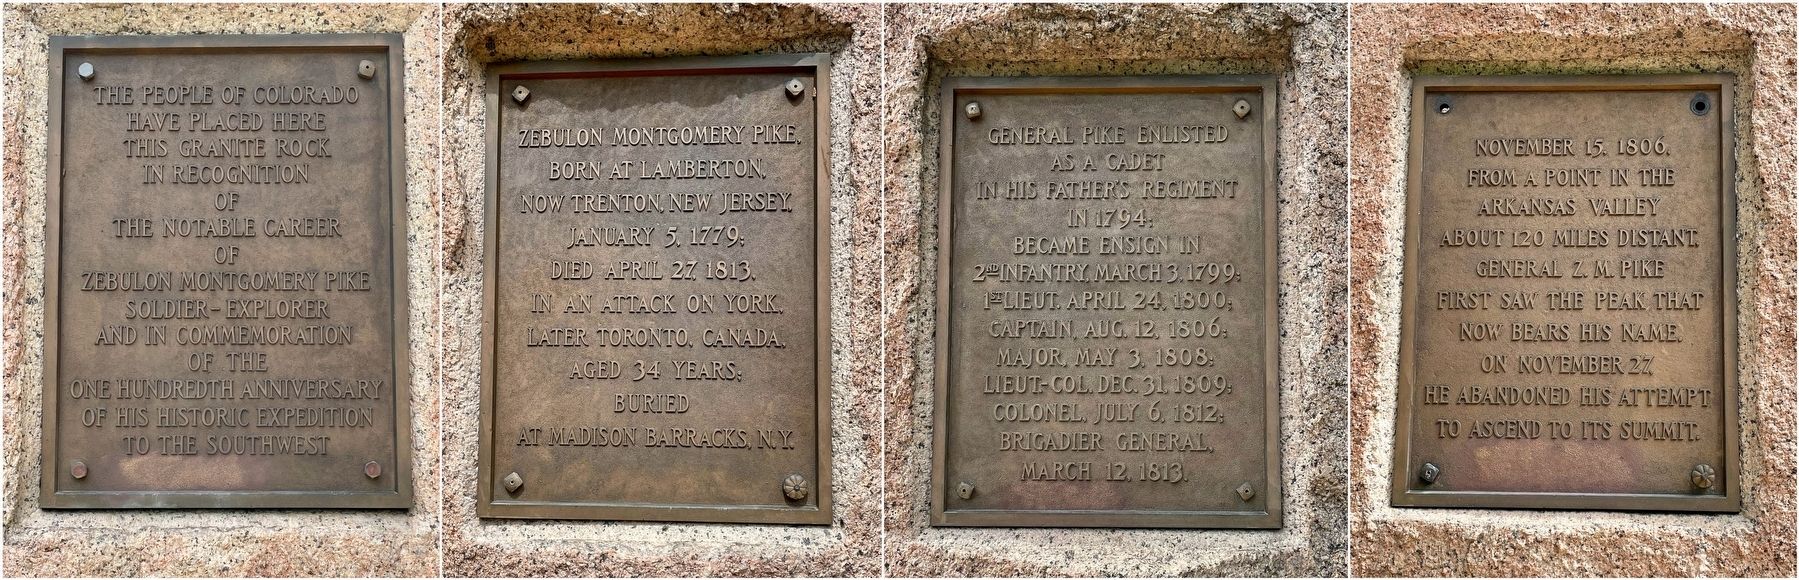 Zebulon Pike, Soldier-Explorer Plaques image. Click for full size.